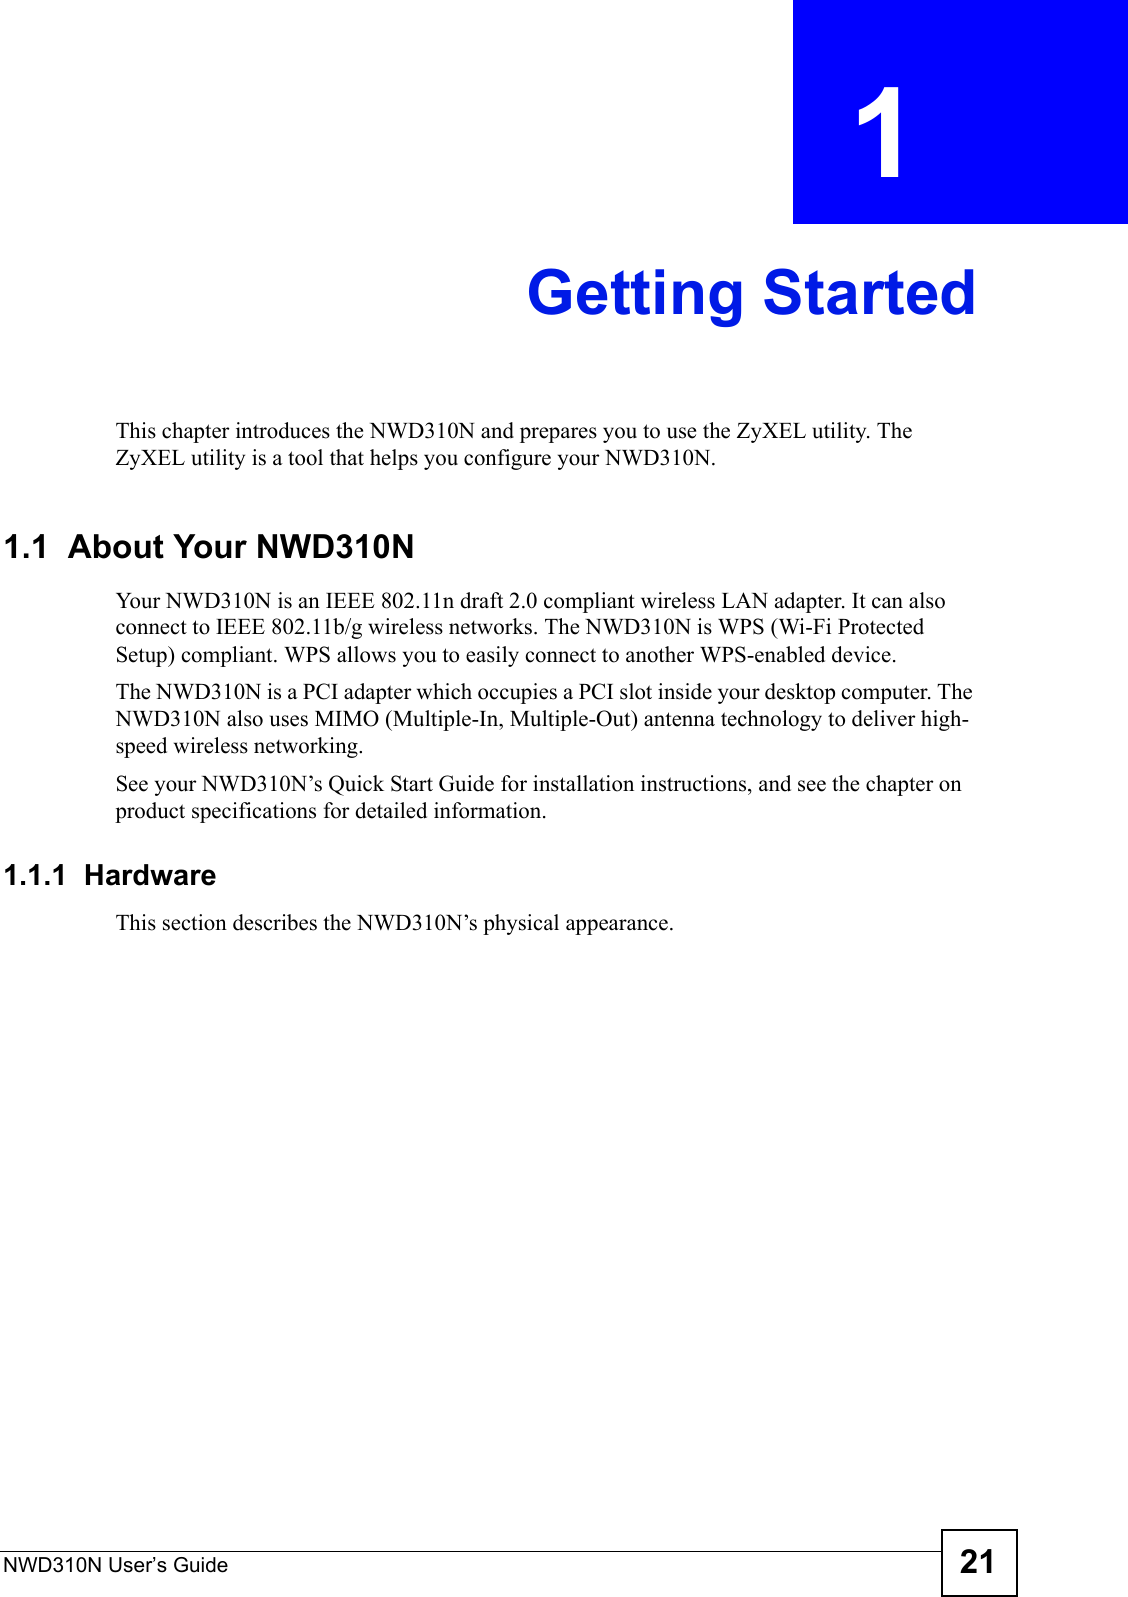 NWD310N User’s Guide 21CHAPTER  1 Getting StartedThis chapter introduces the NWD310N and prepares you to use the ZyXEL utility. The ZyXEL utility is a tool that helps you configure your NWD310N. 1.1  About Your NWD310N  Your NWD310N is an IEEE 802.11n draft 2.0 compliant wireless LAN adapter. It can also connect to IEEE 802.11b/g wireless networks. The NWD310N is WPS (Wi-Fi Protected Setup) compliant. WPS allows you to easily connect to another WPS-enabled device.The NWD310N is a PCI adapter which occupies a PCI slot inside your desktop computer. The NWD310N also uses MIMO (Multiple-In, Multiple-Out) antenna technology to deliver high-speed wireless networking.See your NWD310N’s Quick Start Guide for installation instructions, and see the chapter on product specifications for detailed information.1.1.1  HardwareThis section describes the NWD310N’s physical appearance.